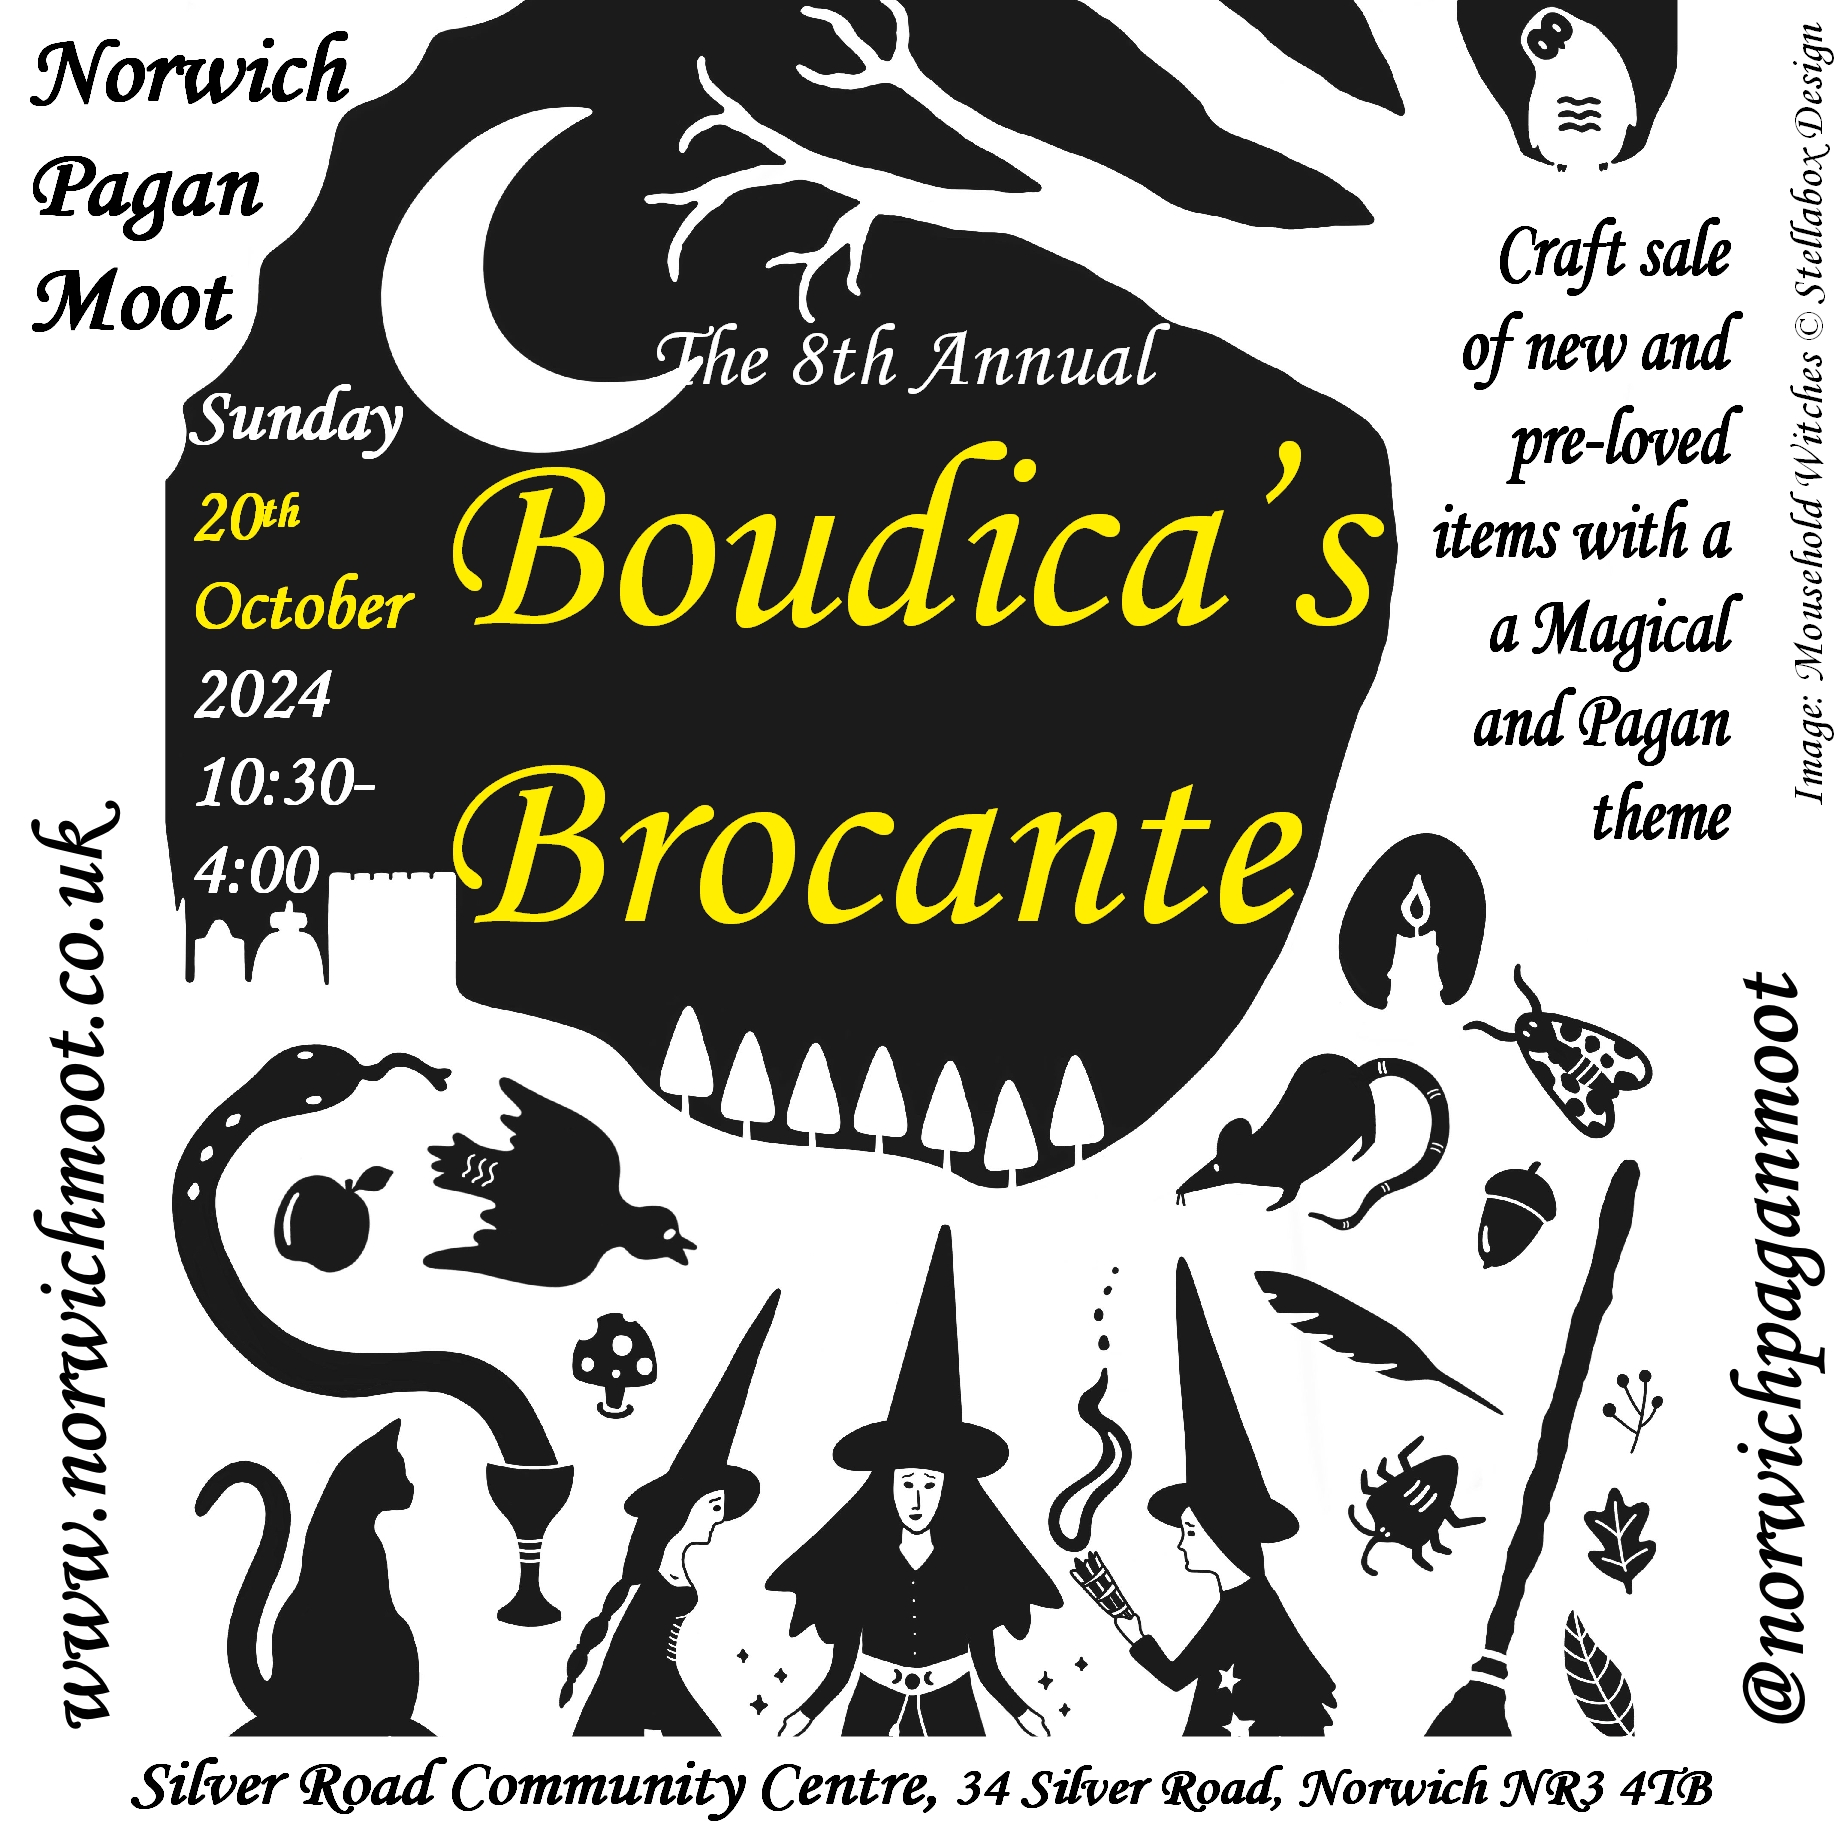 Image promoting the Norwich Moot Boudica's Brocante, 20th October 2024, with illustration 'Mousehold Witches' by Stellabox Design.